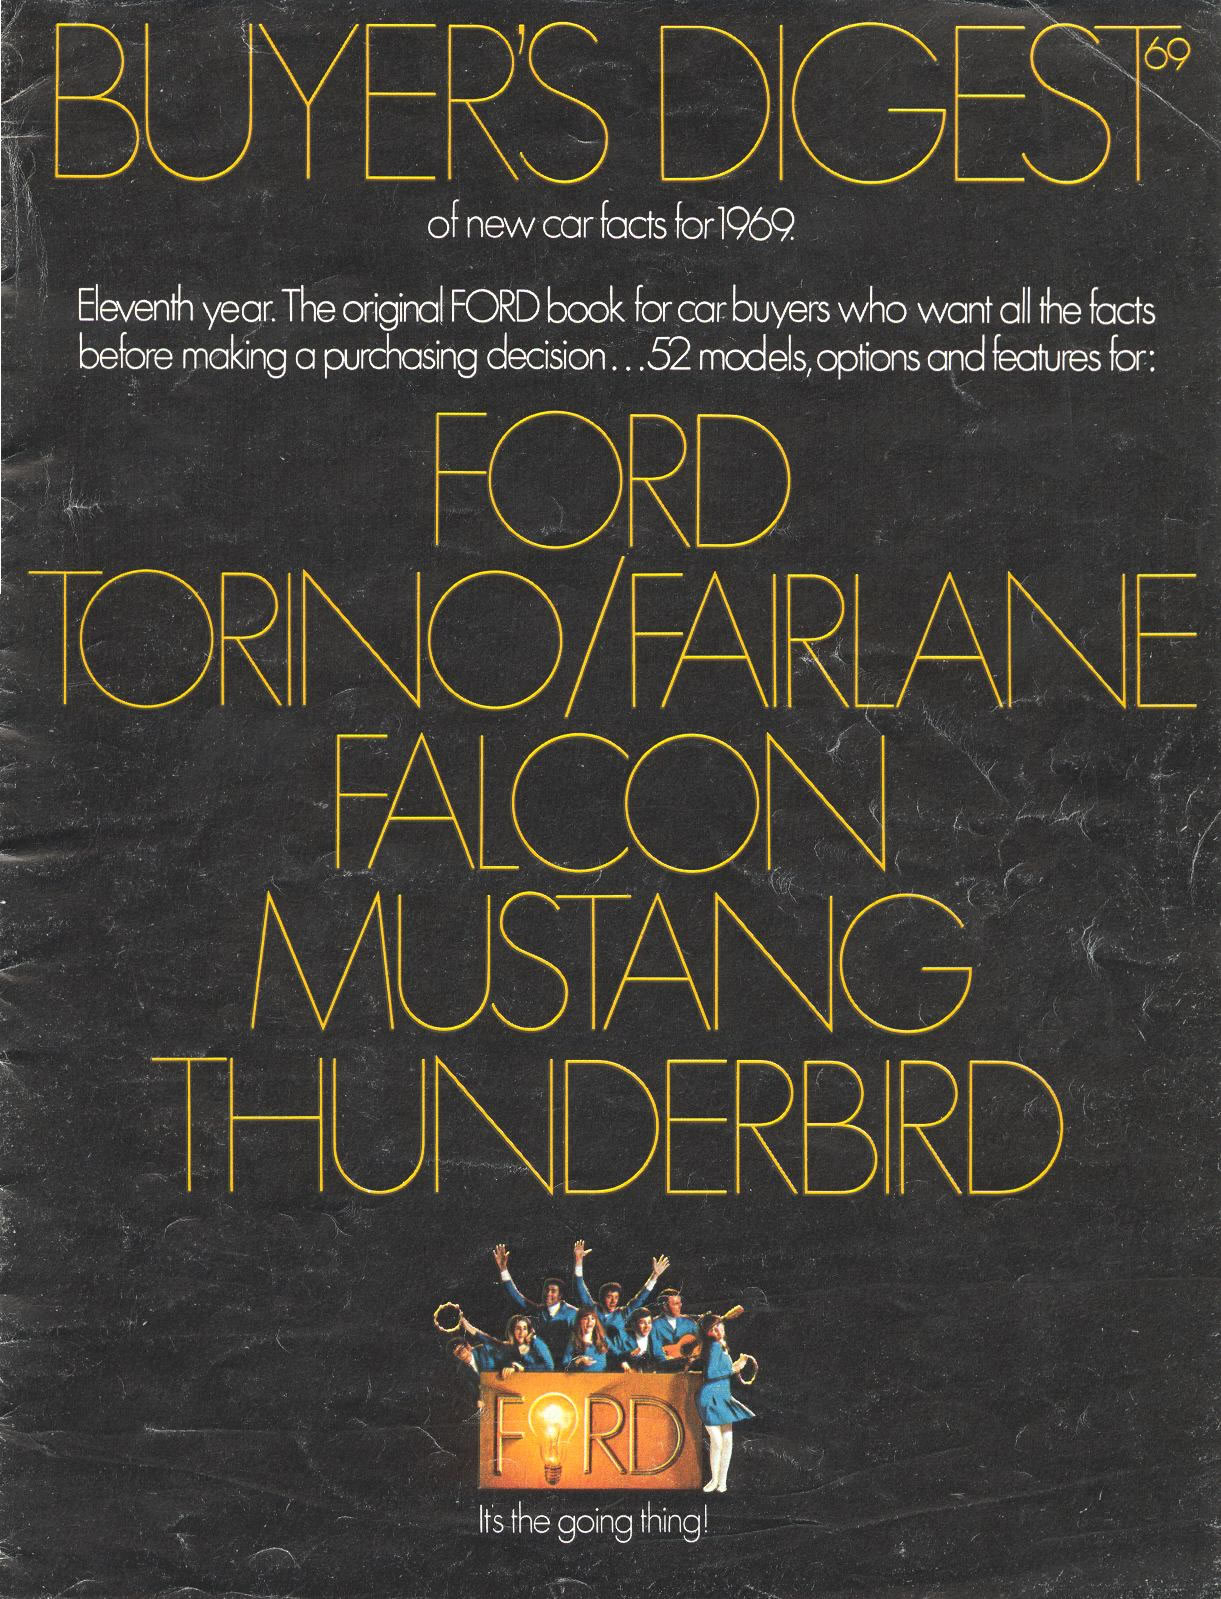 1969 Ford Buyers Digest-01